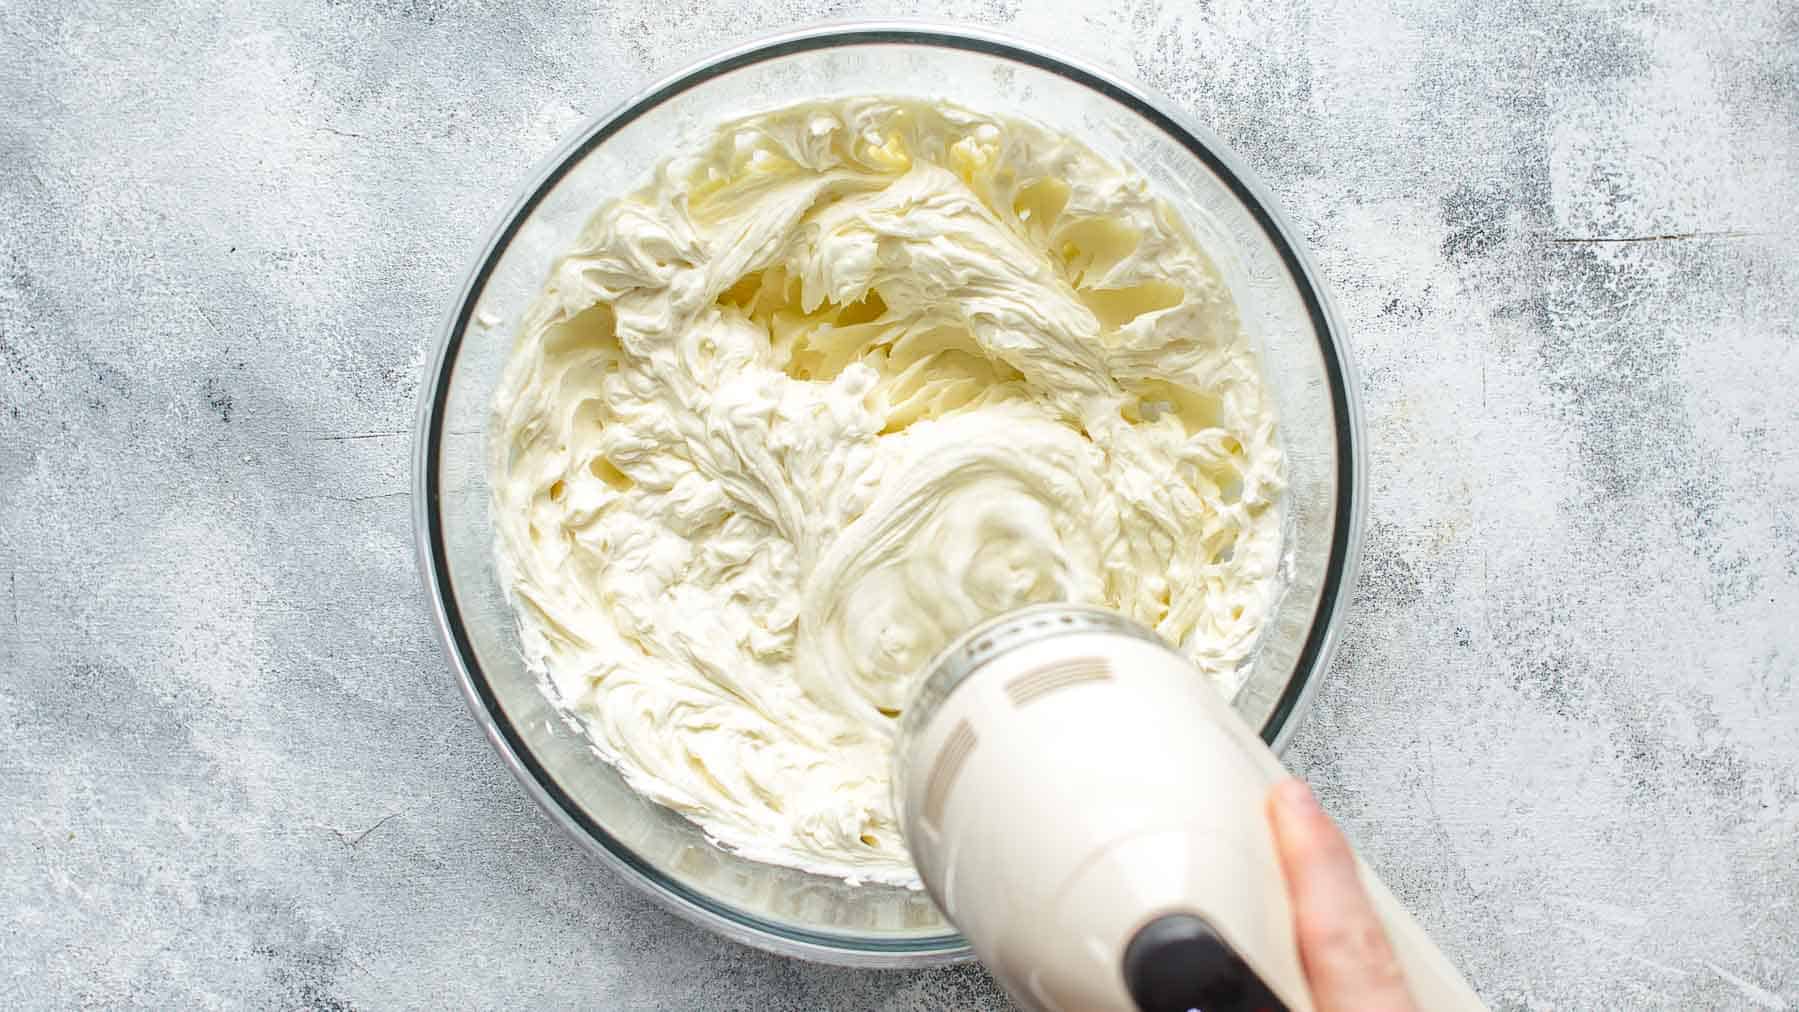 Mixing cream cheese, flour, and sugar in a large mixing bowl